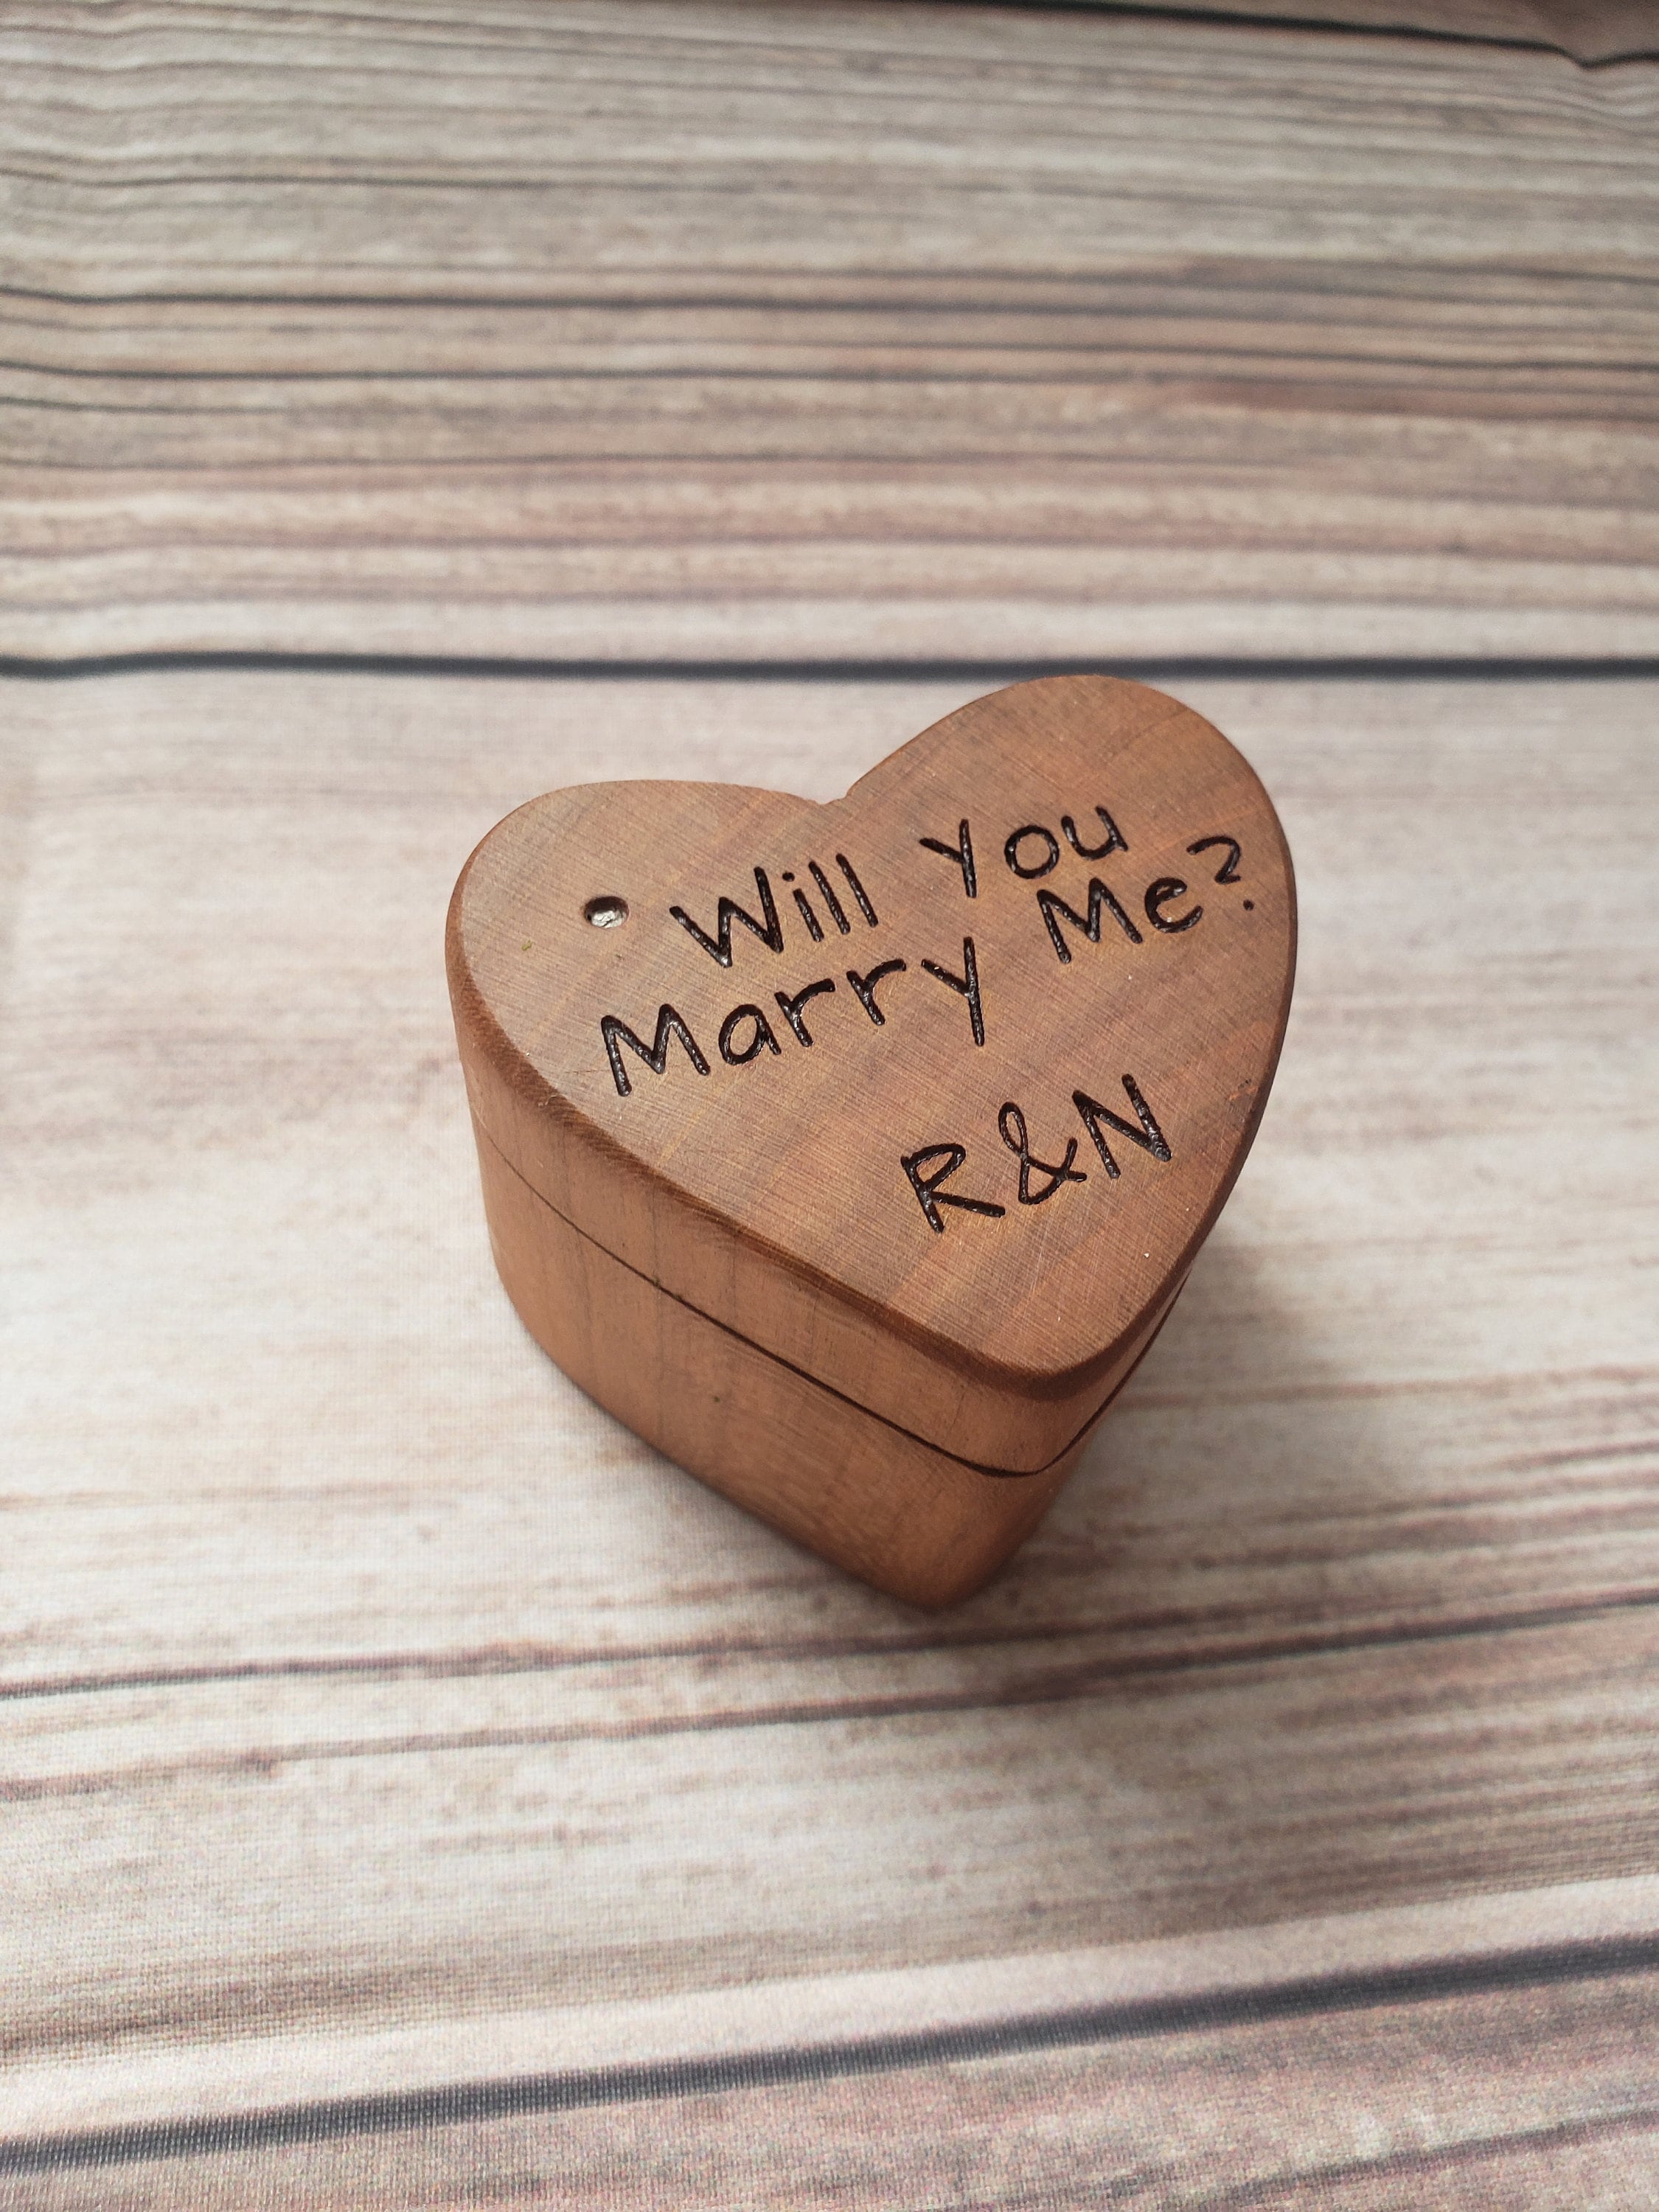 5th Anniversary Gift Idea Ring Box for Wedding Wedding Ring Box Wood Personalised Couples Wooden Wedding Ring Box